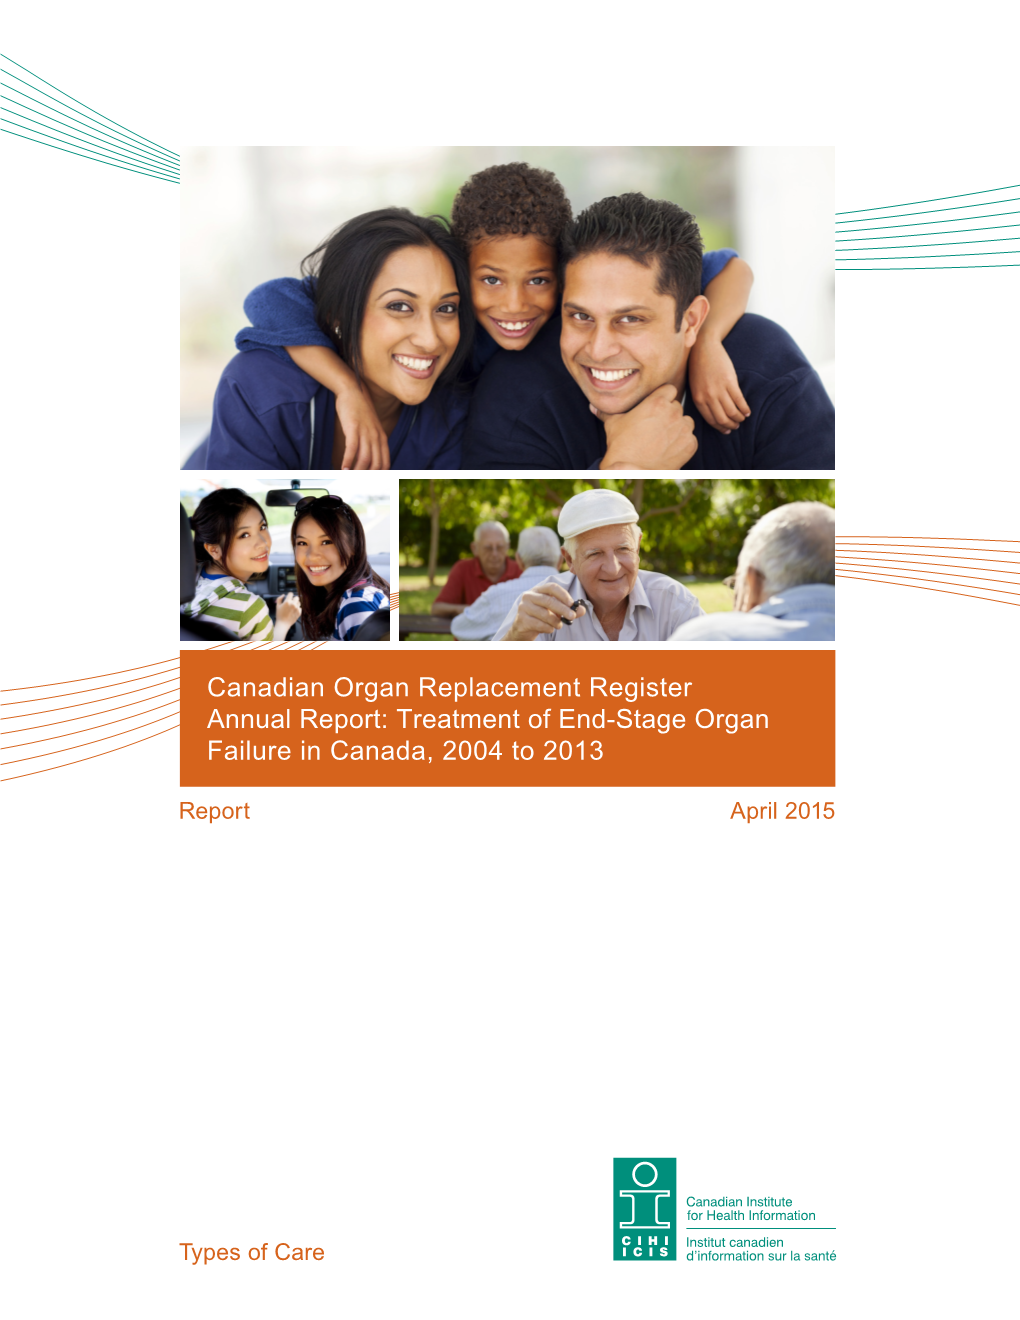 Canadian Organ Replacement Register Annual Report: Treatment of End-Stage Organ Failure in Canada, 2004 to 2013